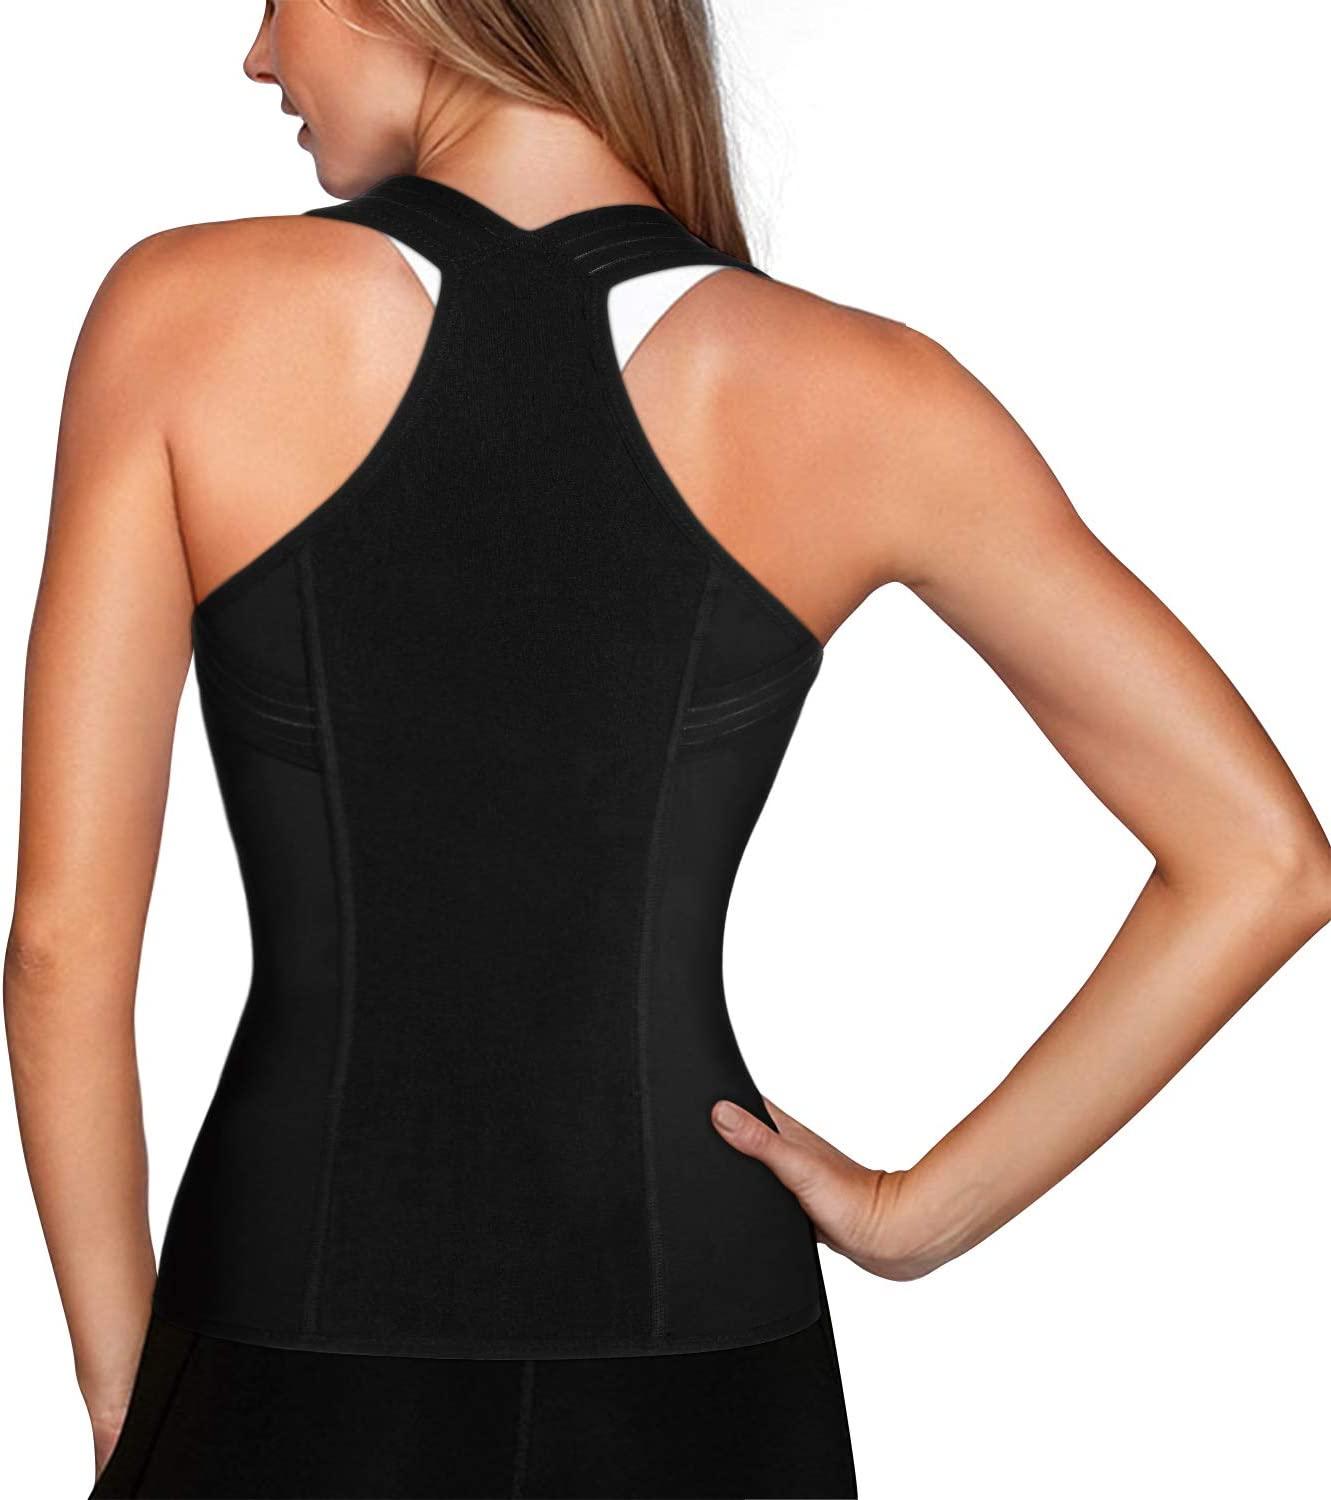  URSEXYLY Women Back Braces Posture Corrector Waist Trainer Vest  Tummy Control Body Shaper for Spinal Neck Shoulder and Upper Back Supports  (S, Black) : Clothing, Shoes & Jewelry